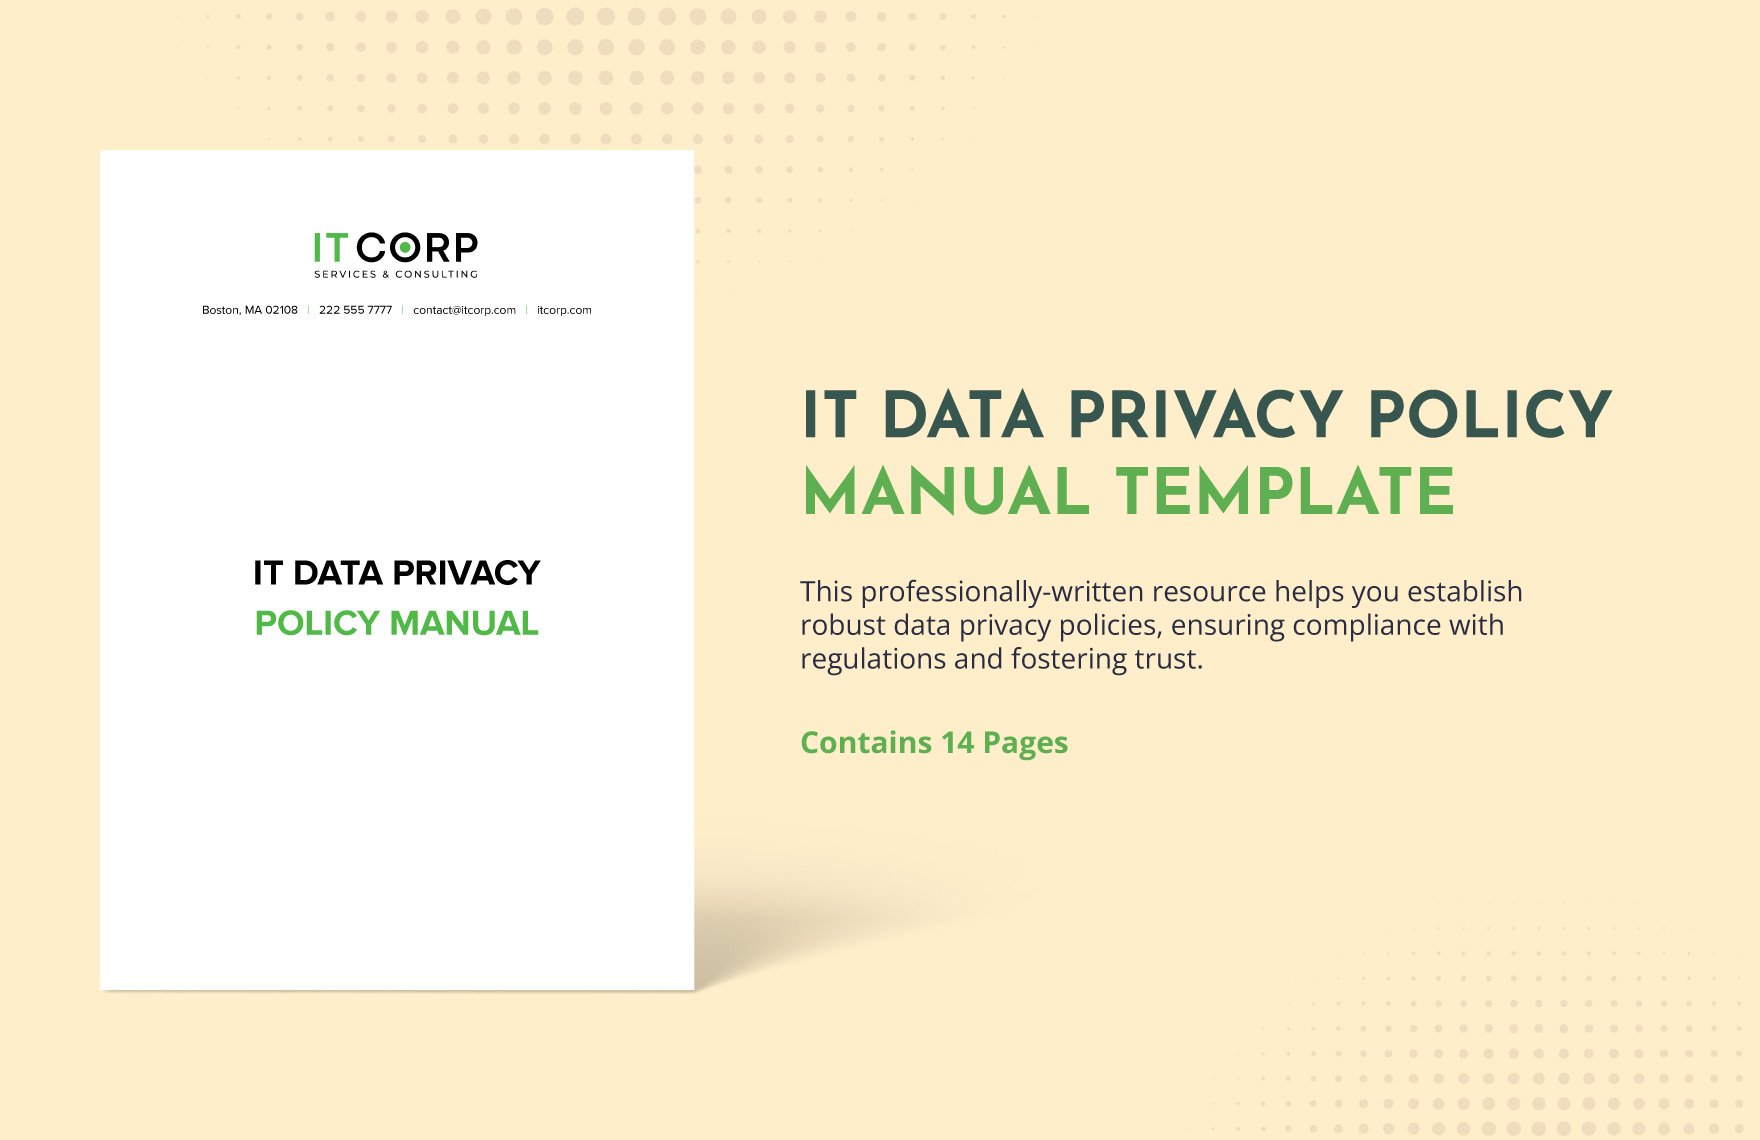 IT Data Privacy Policy Manual Template in Word, Google Docs, PDF